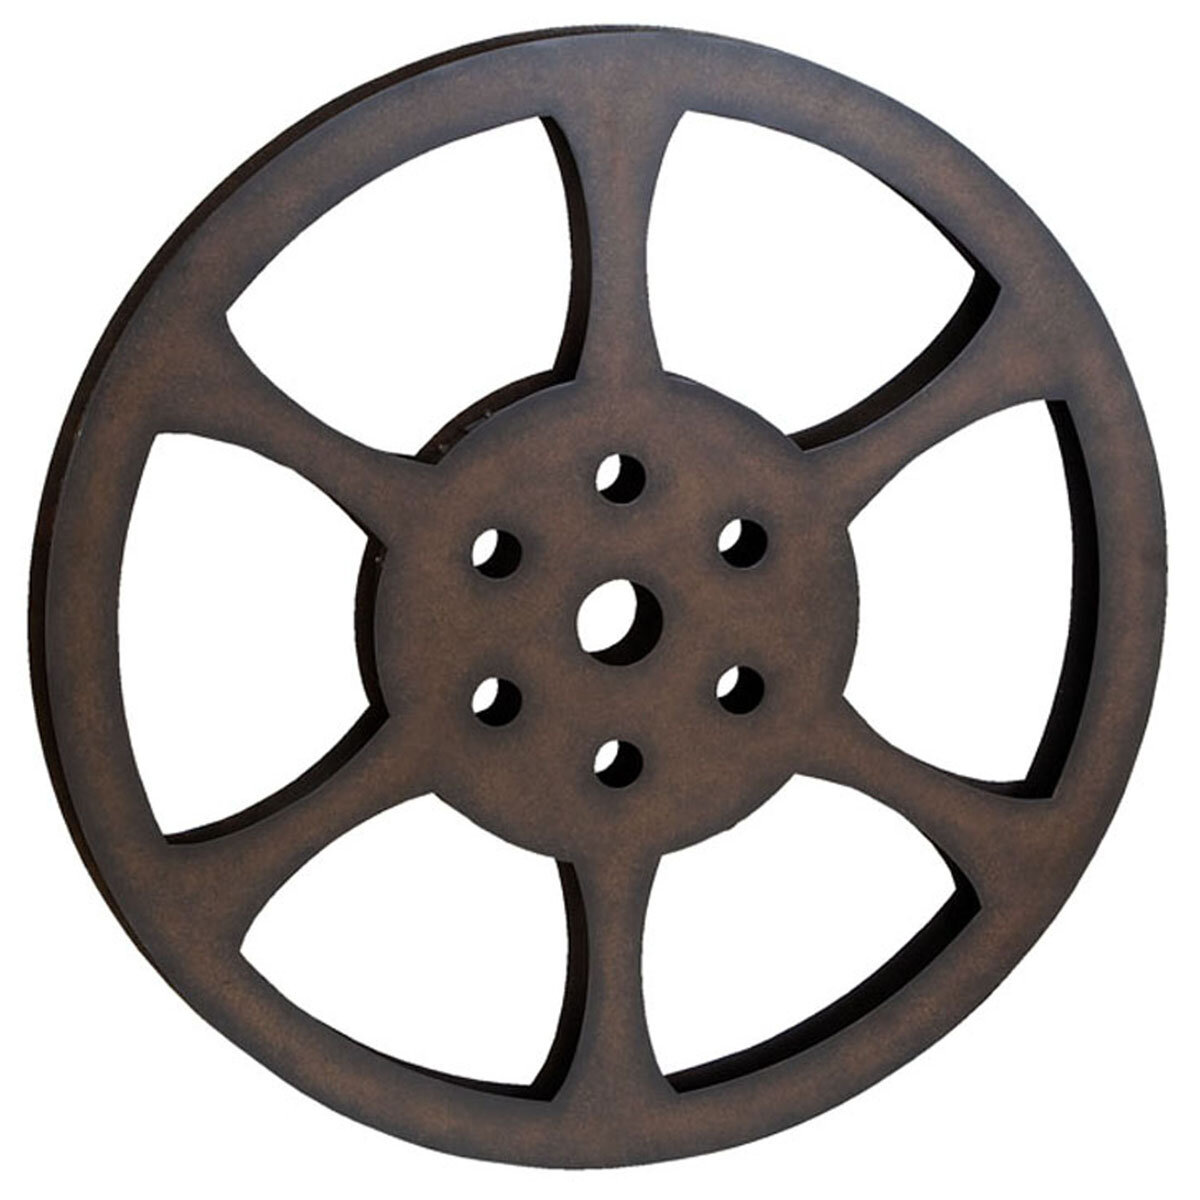 Ec World Imports Hollywood 32 Metal Film Reel Home Movie Theater Accent Art Wall Decor Reviews Wayfair